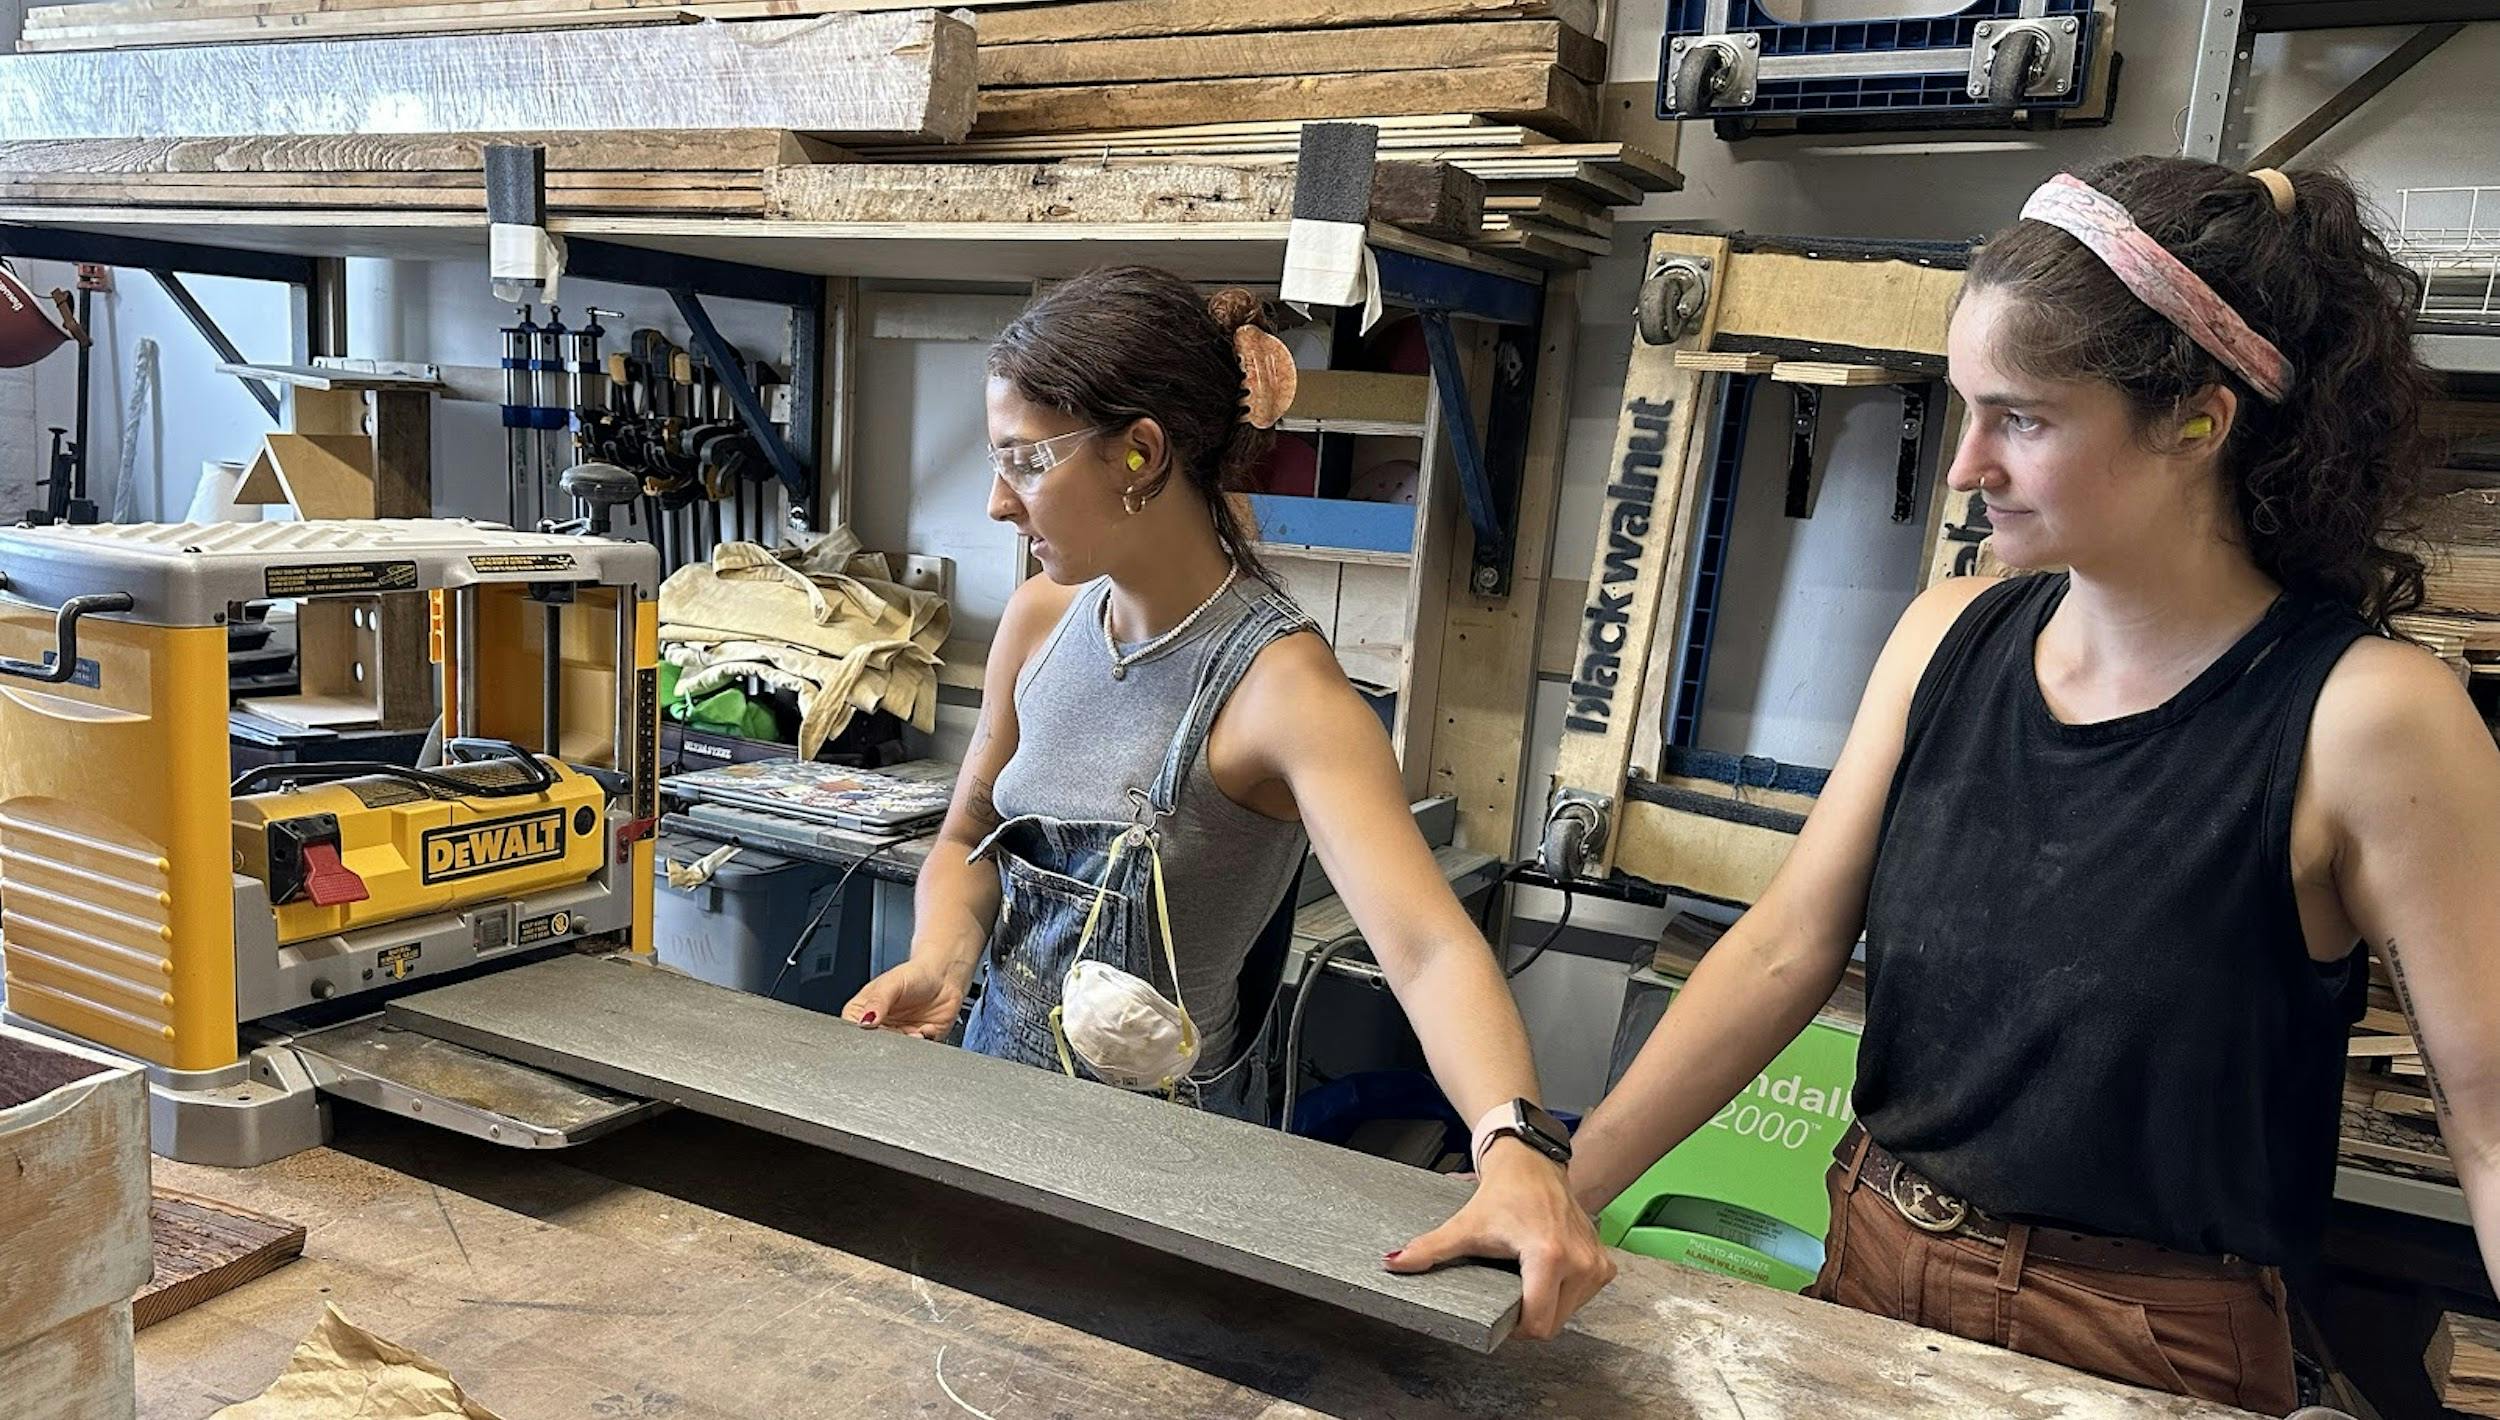 A photo taken in a carpentry studio with shelves of lumber and equipment in the background. A young woman, wearing clear safety-glasses and ear protection, uses a planer on a long piece of wood under the supervision of another woman.